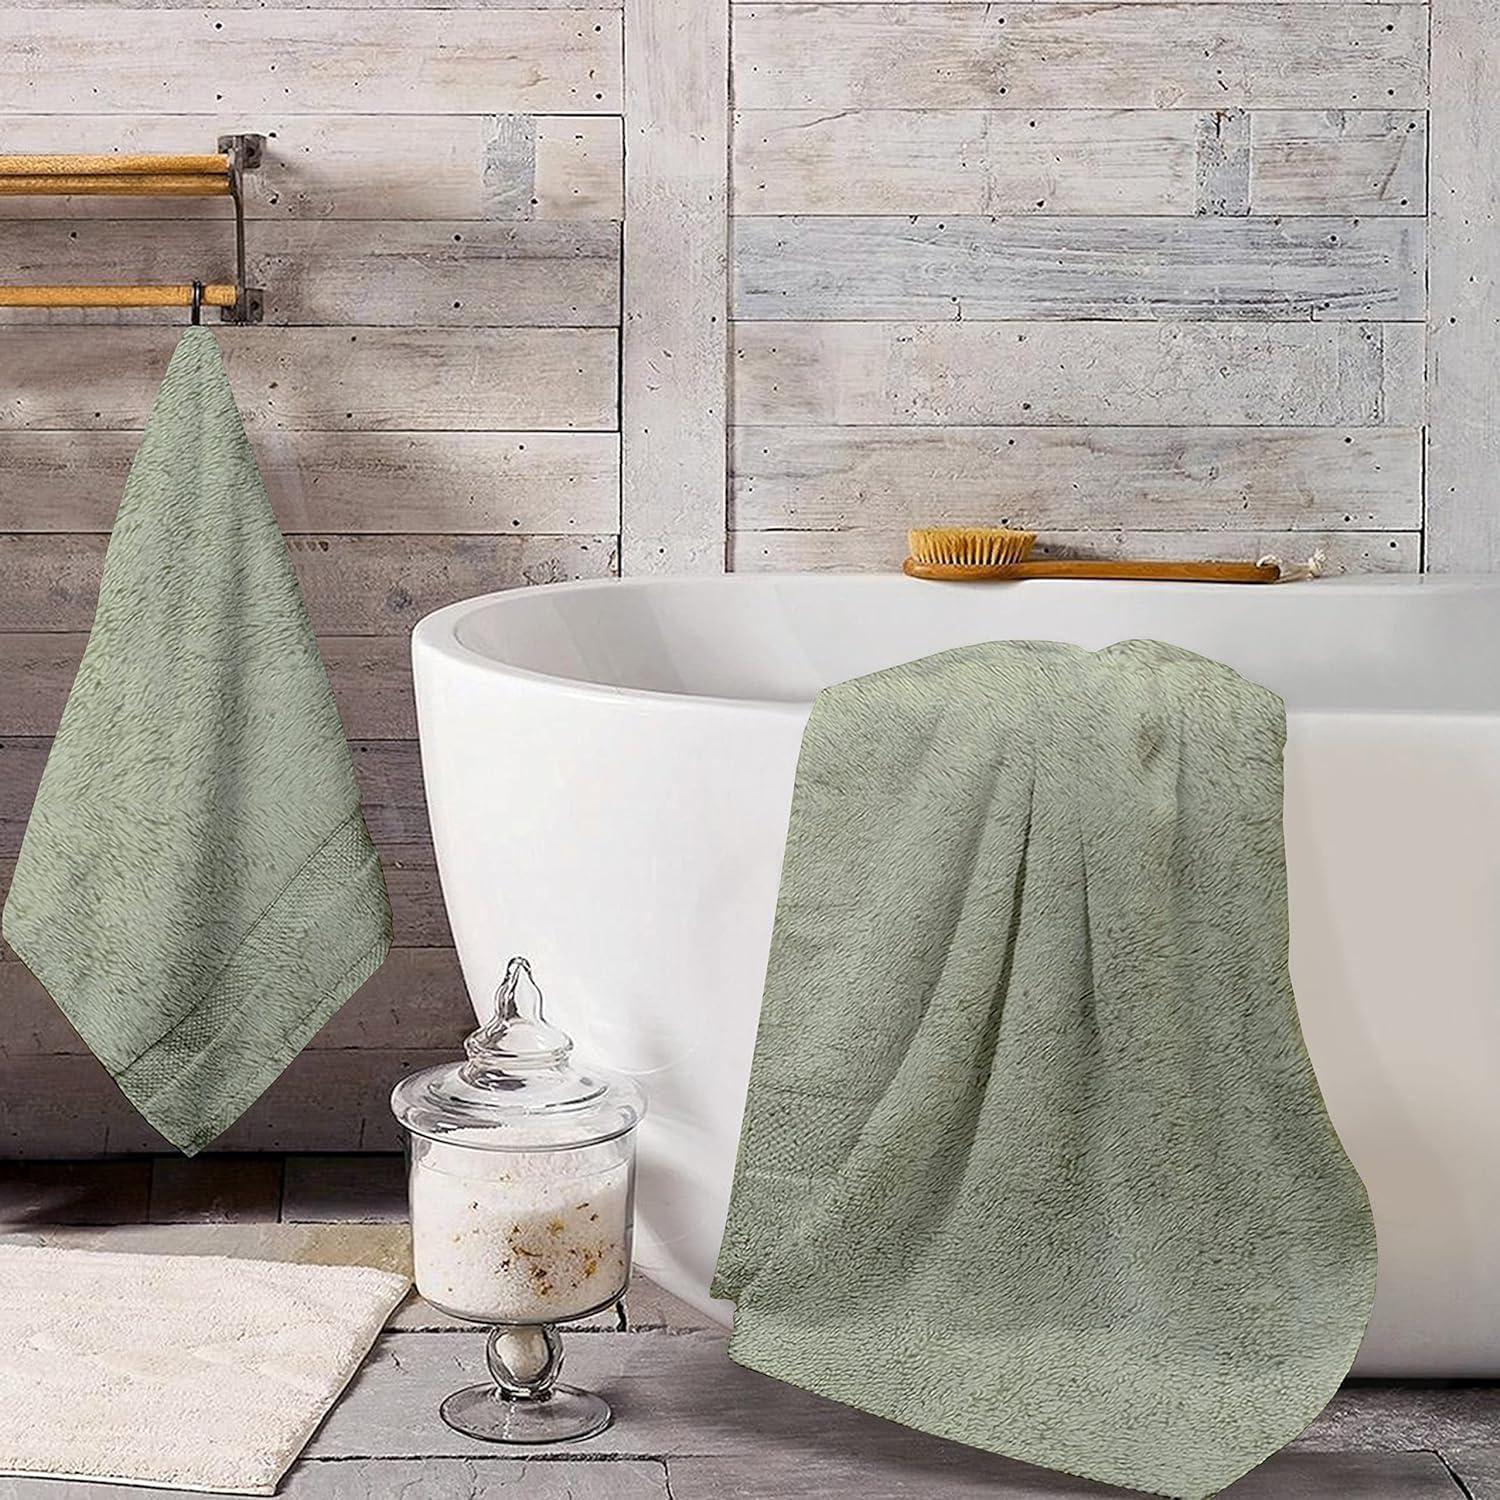 13 x 13 Luxury Spa Beach Safe Collection Standard Bath Towel 2 Pack. 100% Organic Cotton Grown, Plush Feel, Woven Fabric, and High-Performance.